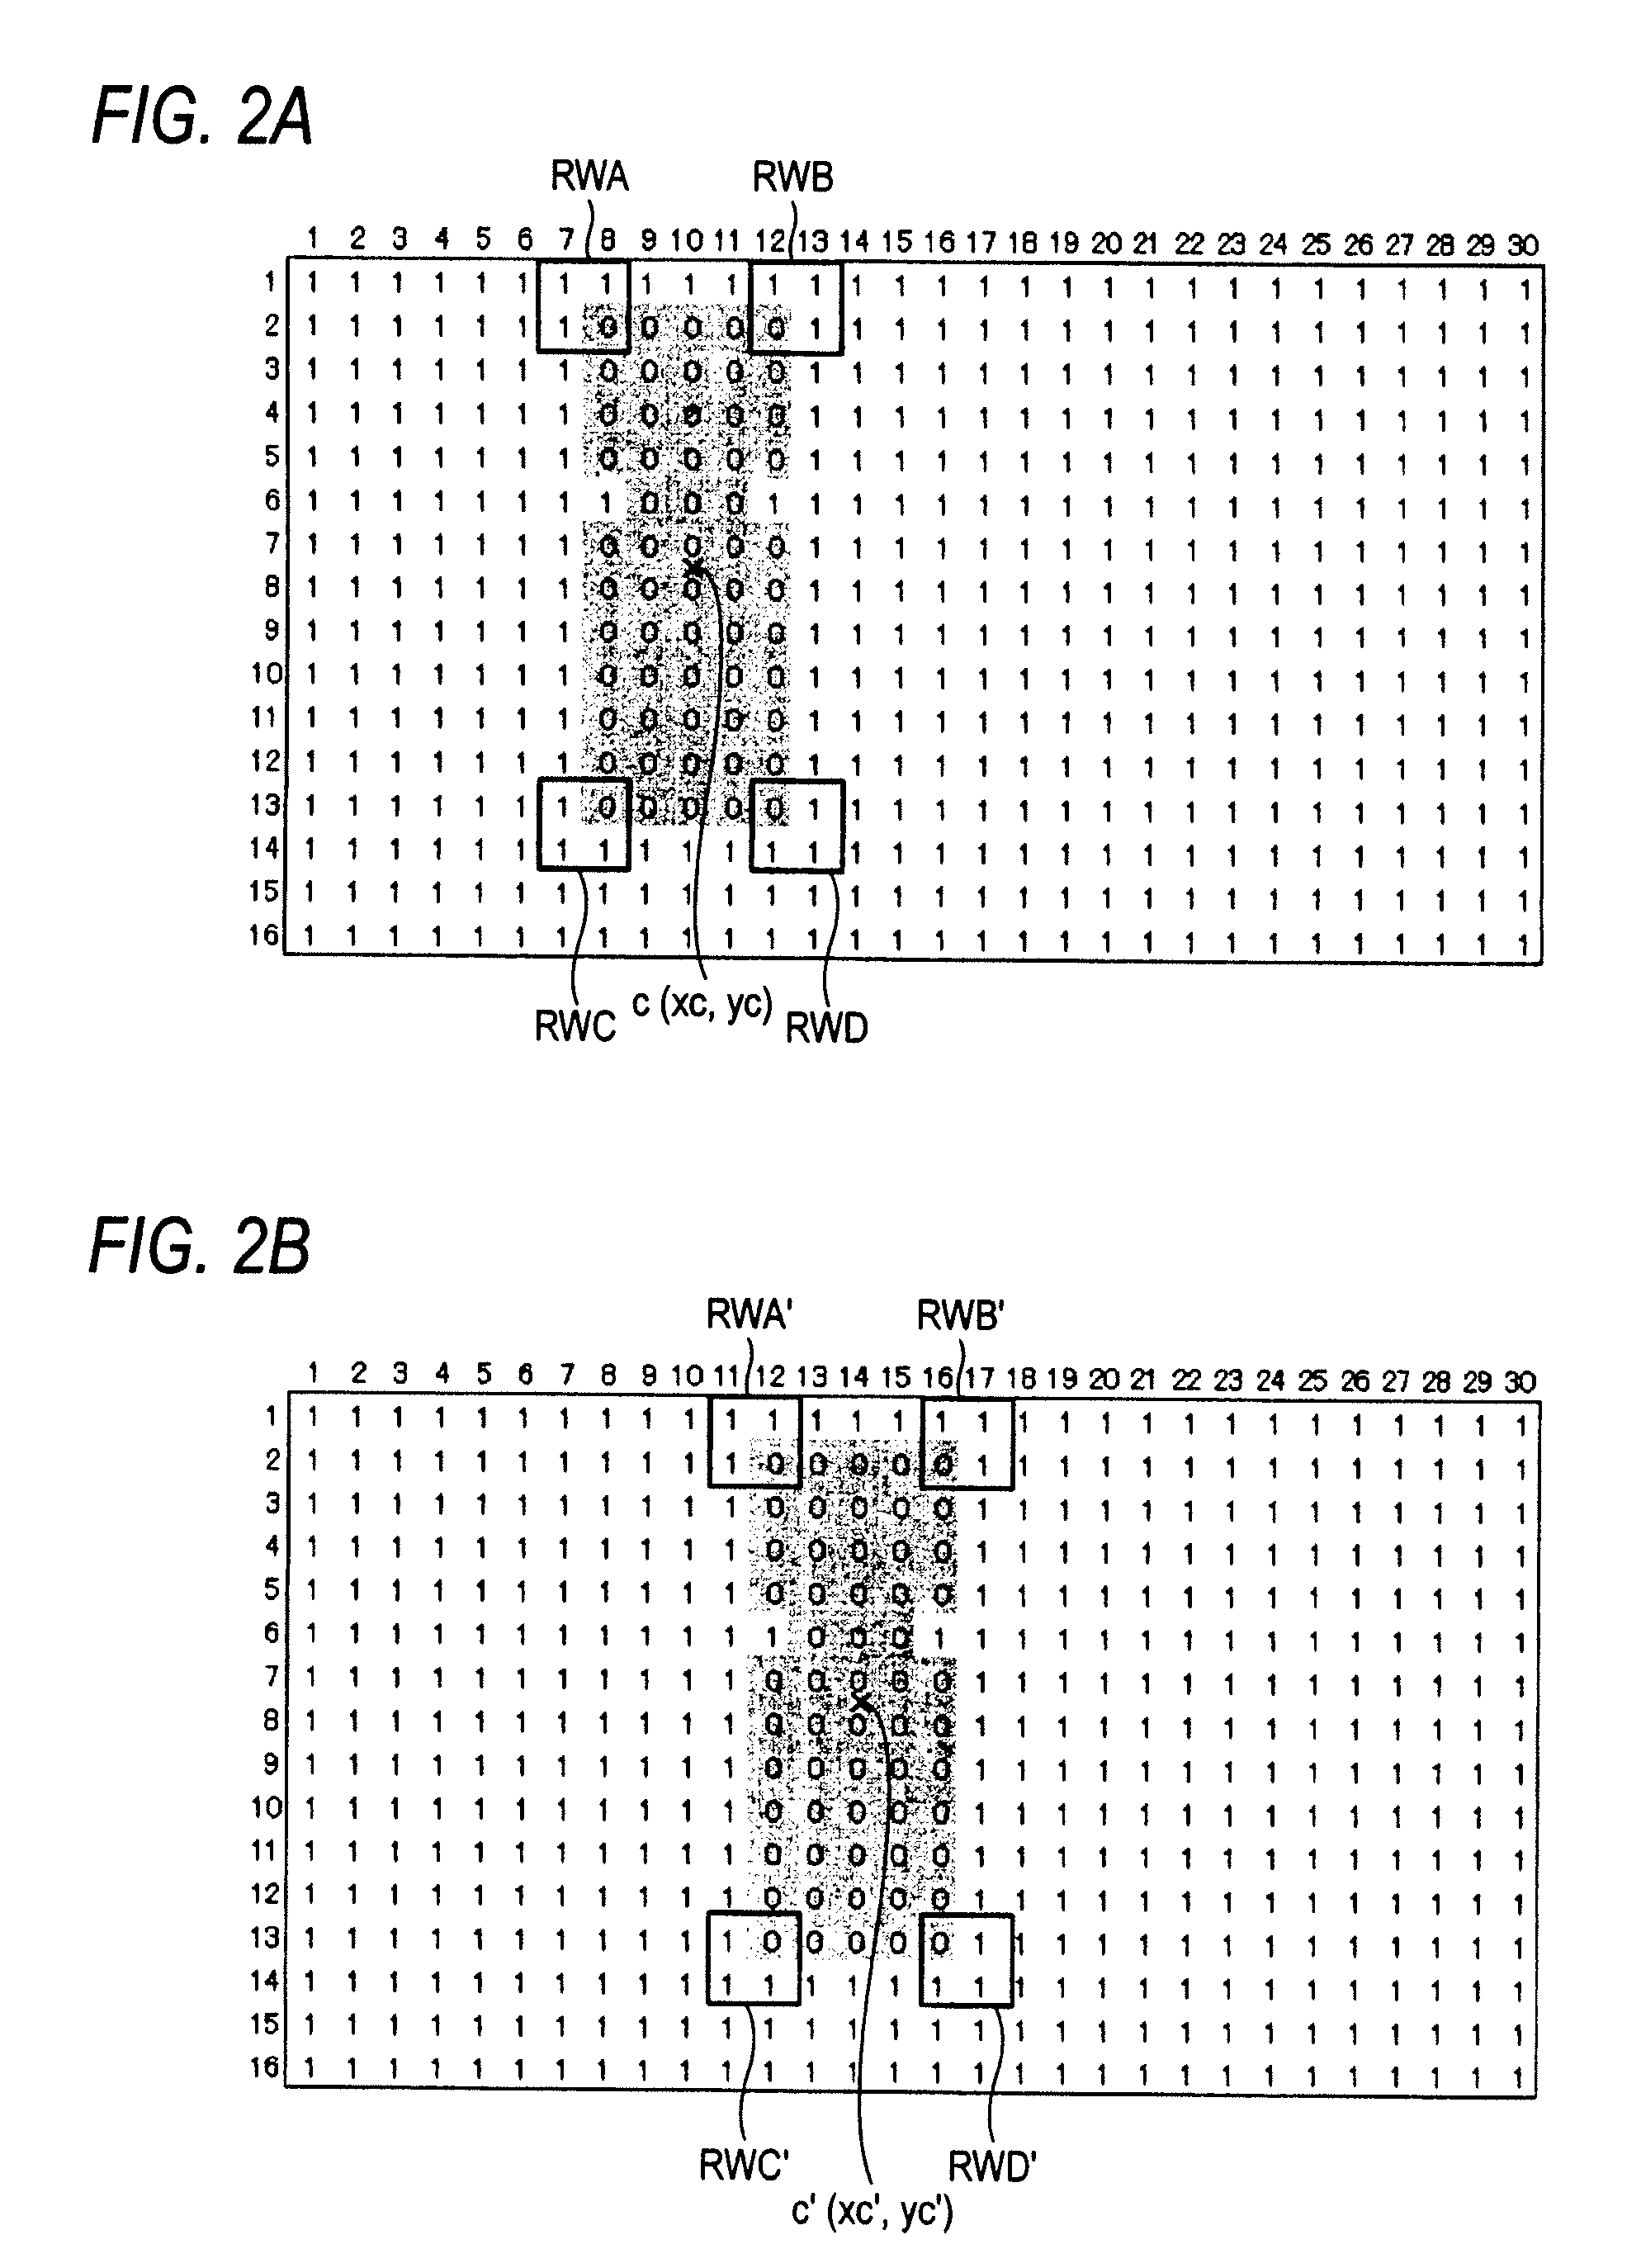 Image processing apparatus, image processing method, image processing program, recording medium recording the image processing program, and moving object detection system